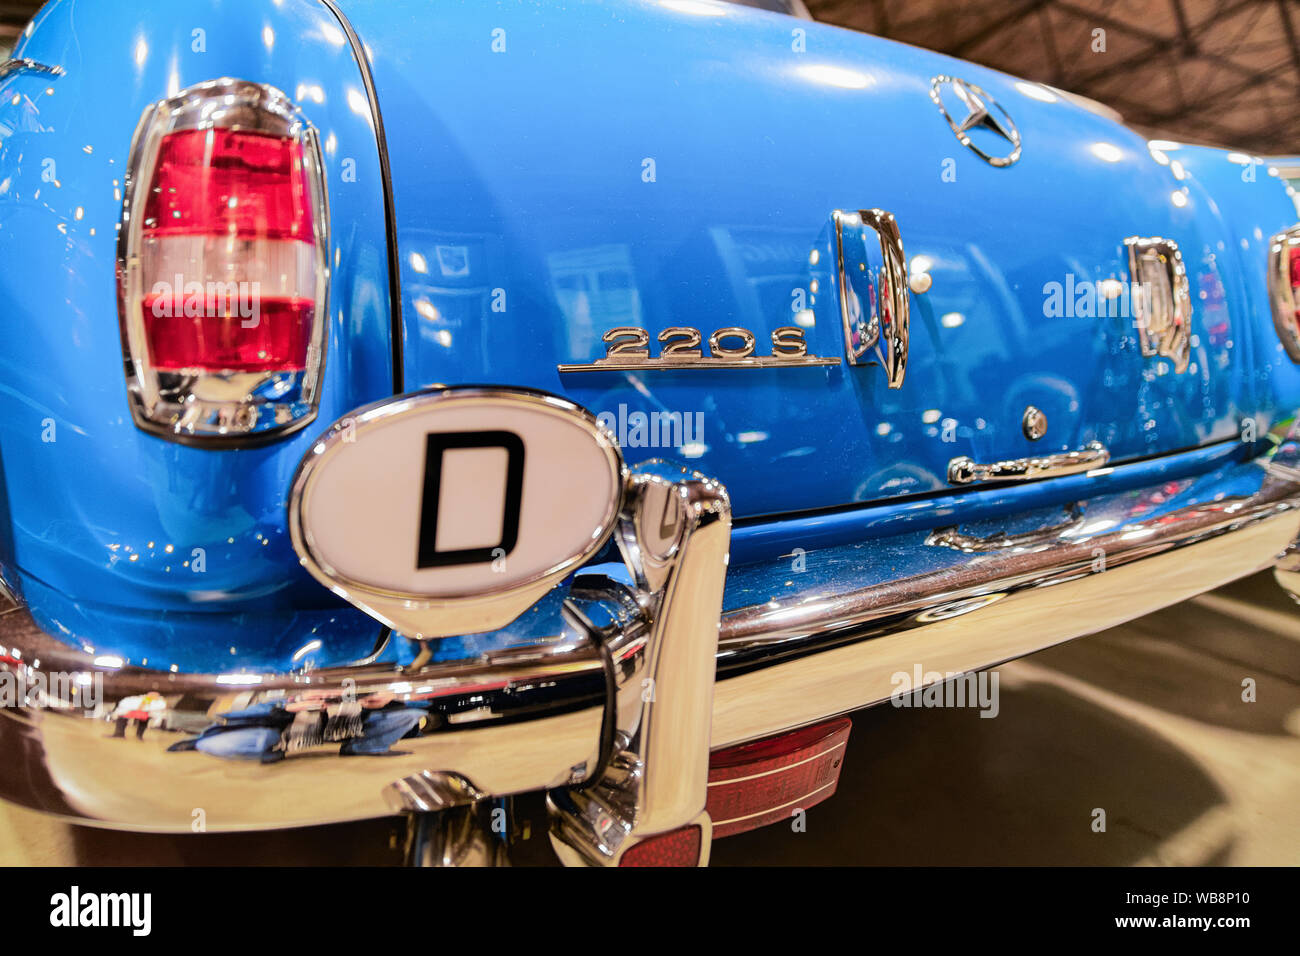 Berlin, Germany - December 11, 2017: Back headlight of blue Mercedes Benz 220 s vintage classic car in Berlin in Germany. Details of auto Stock Photo